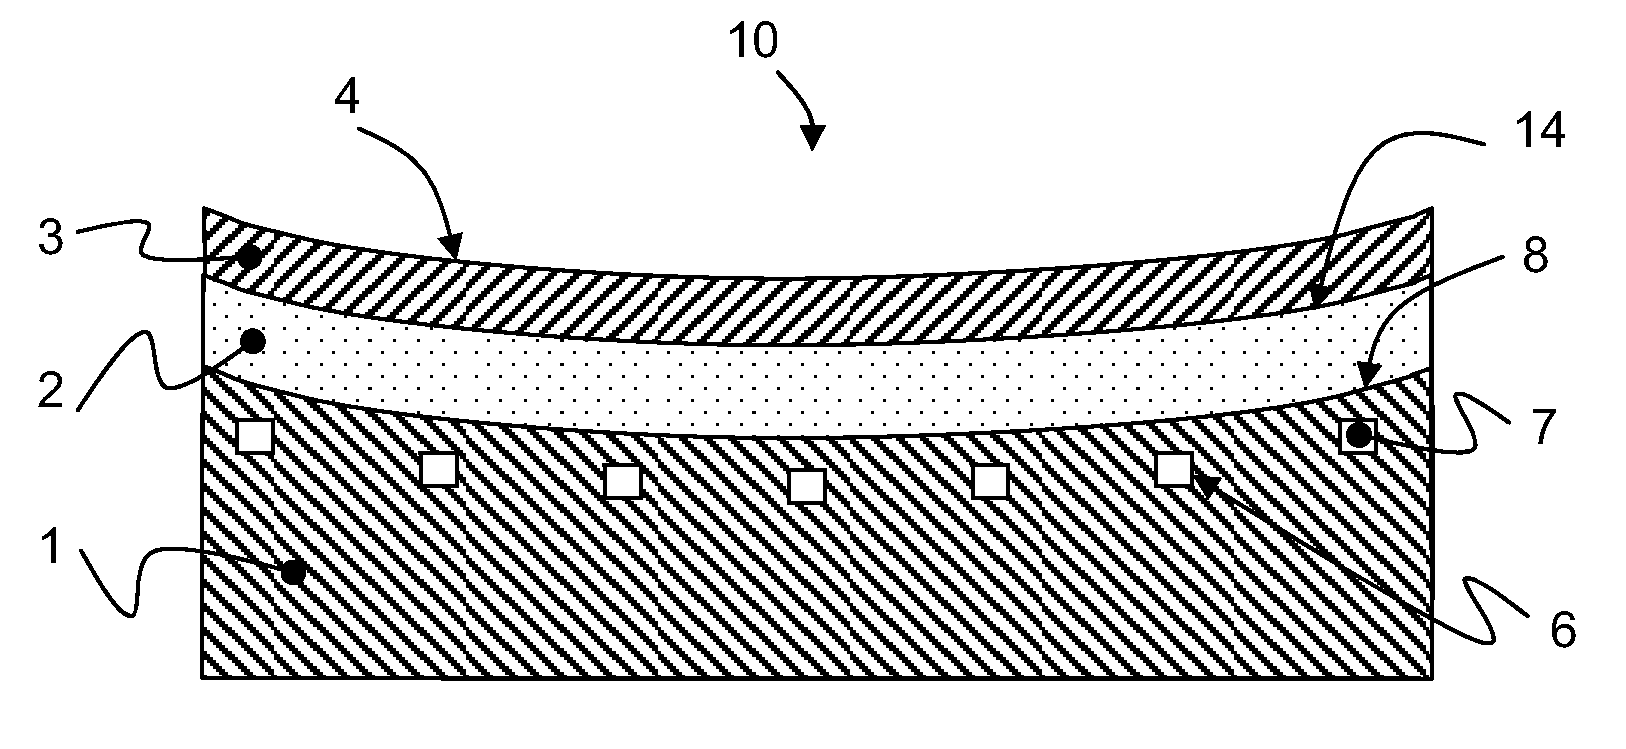 Reflective optical element for use in an EUV system